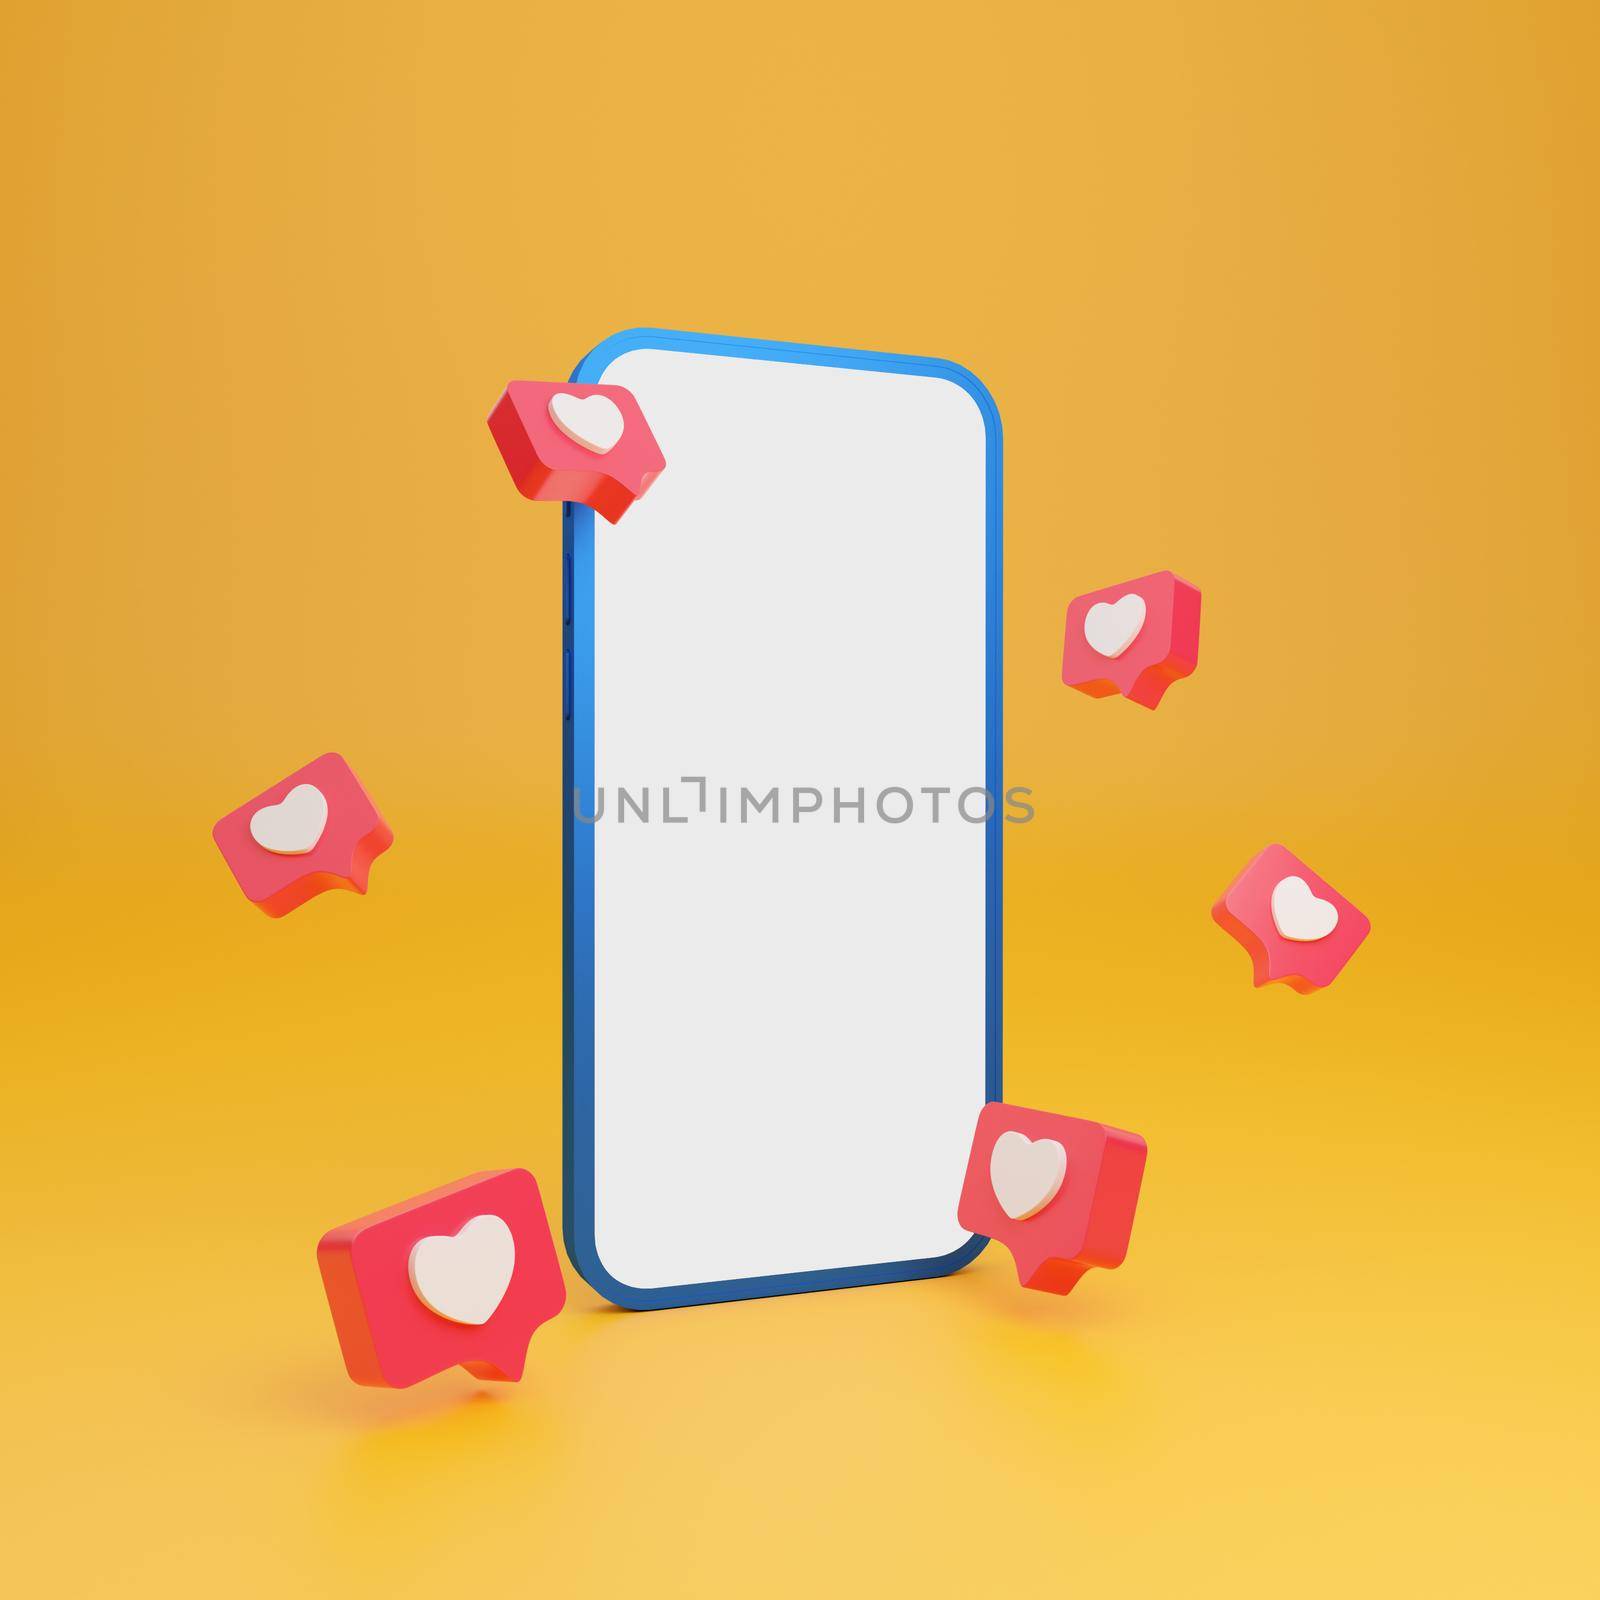 Empty screen smartphone mockup with heart in speech bubble message, 3d illustration